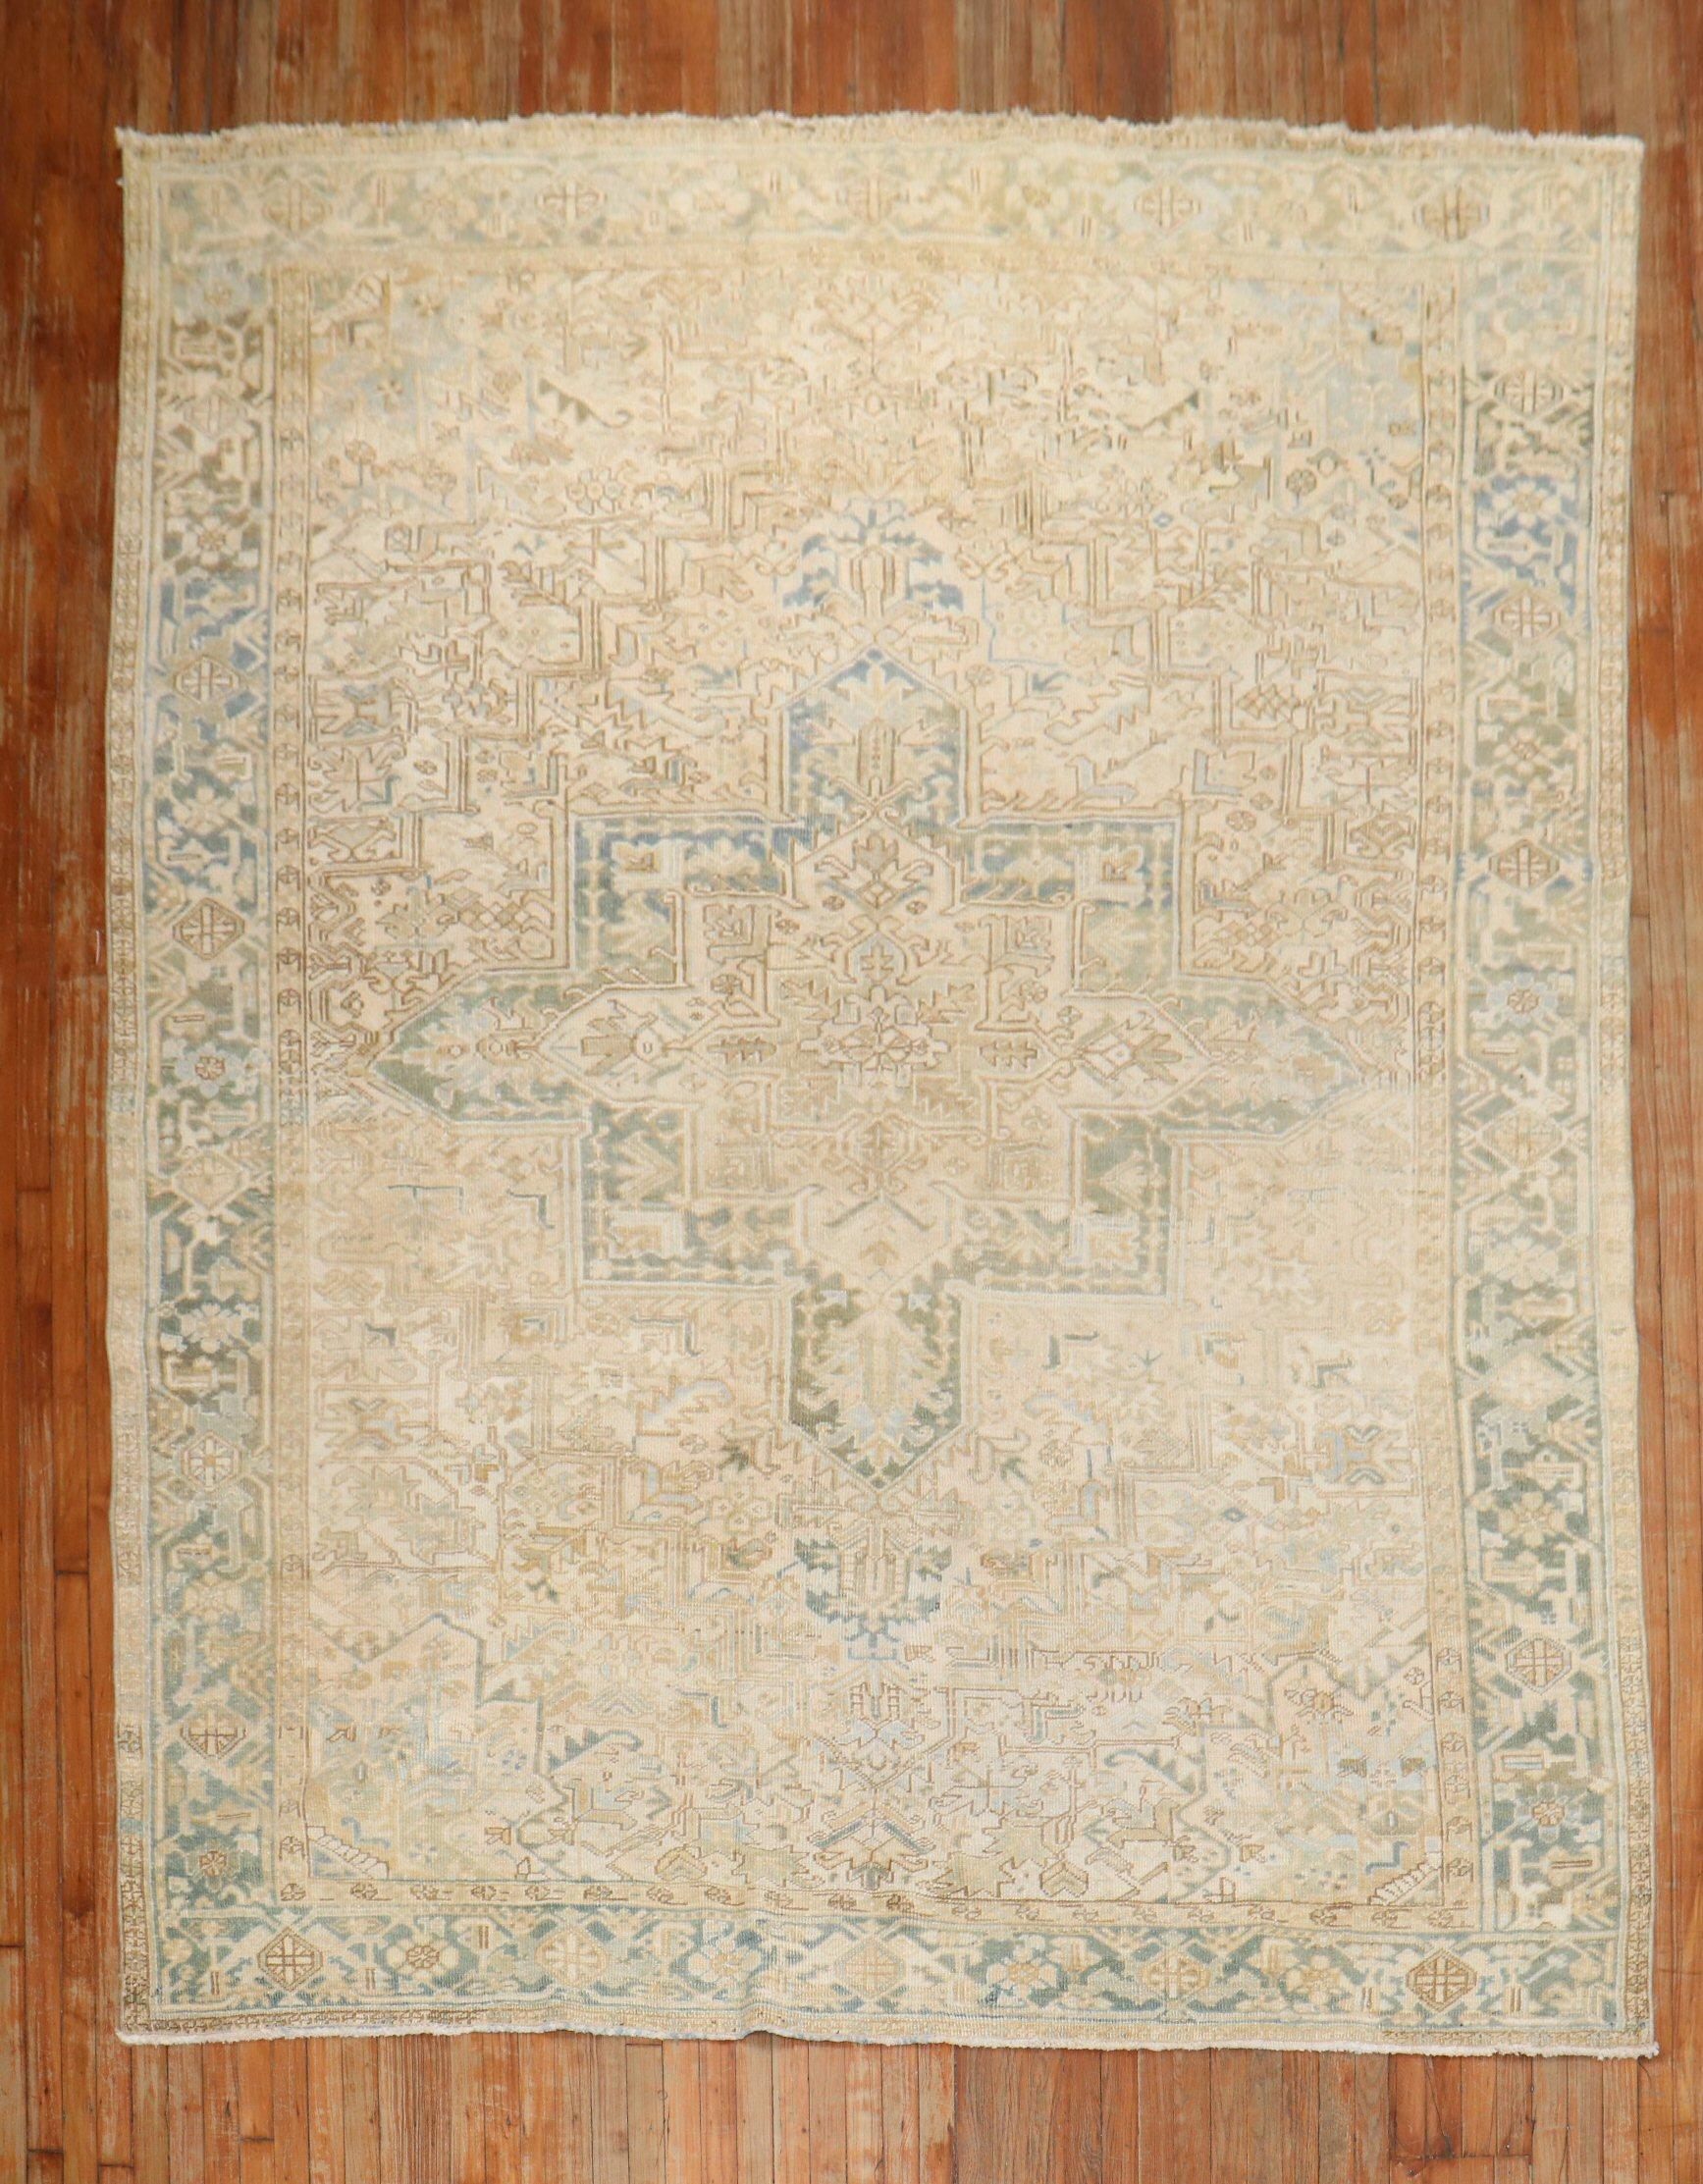 A room size 2nd quarter of the 20th Century Persian Heriz Room Size Rug

8'1'' x 10'11''


With distinctive large scale motifs and a wide ranging palette of warm colors, the antique Heriz carpet is probably the most popular of the Persian village